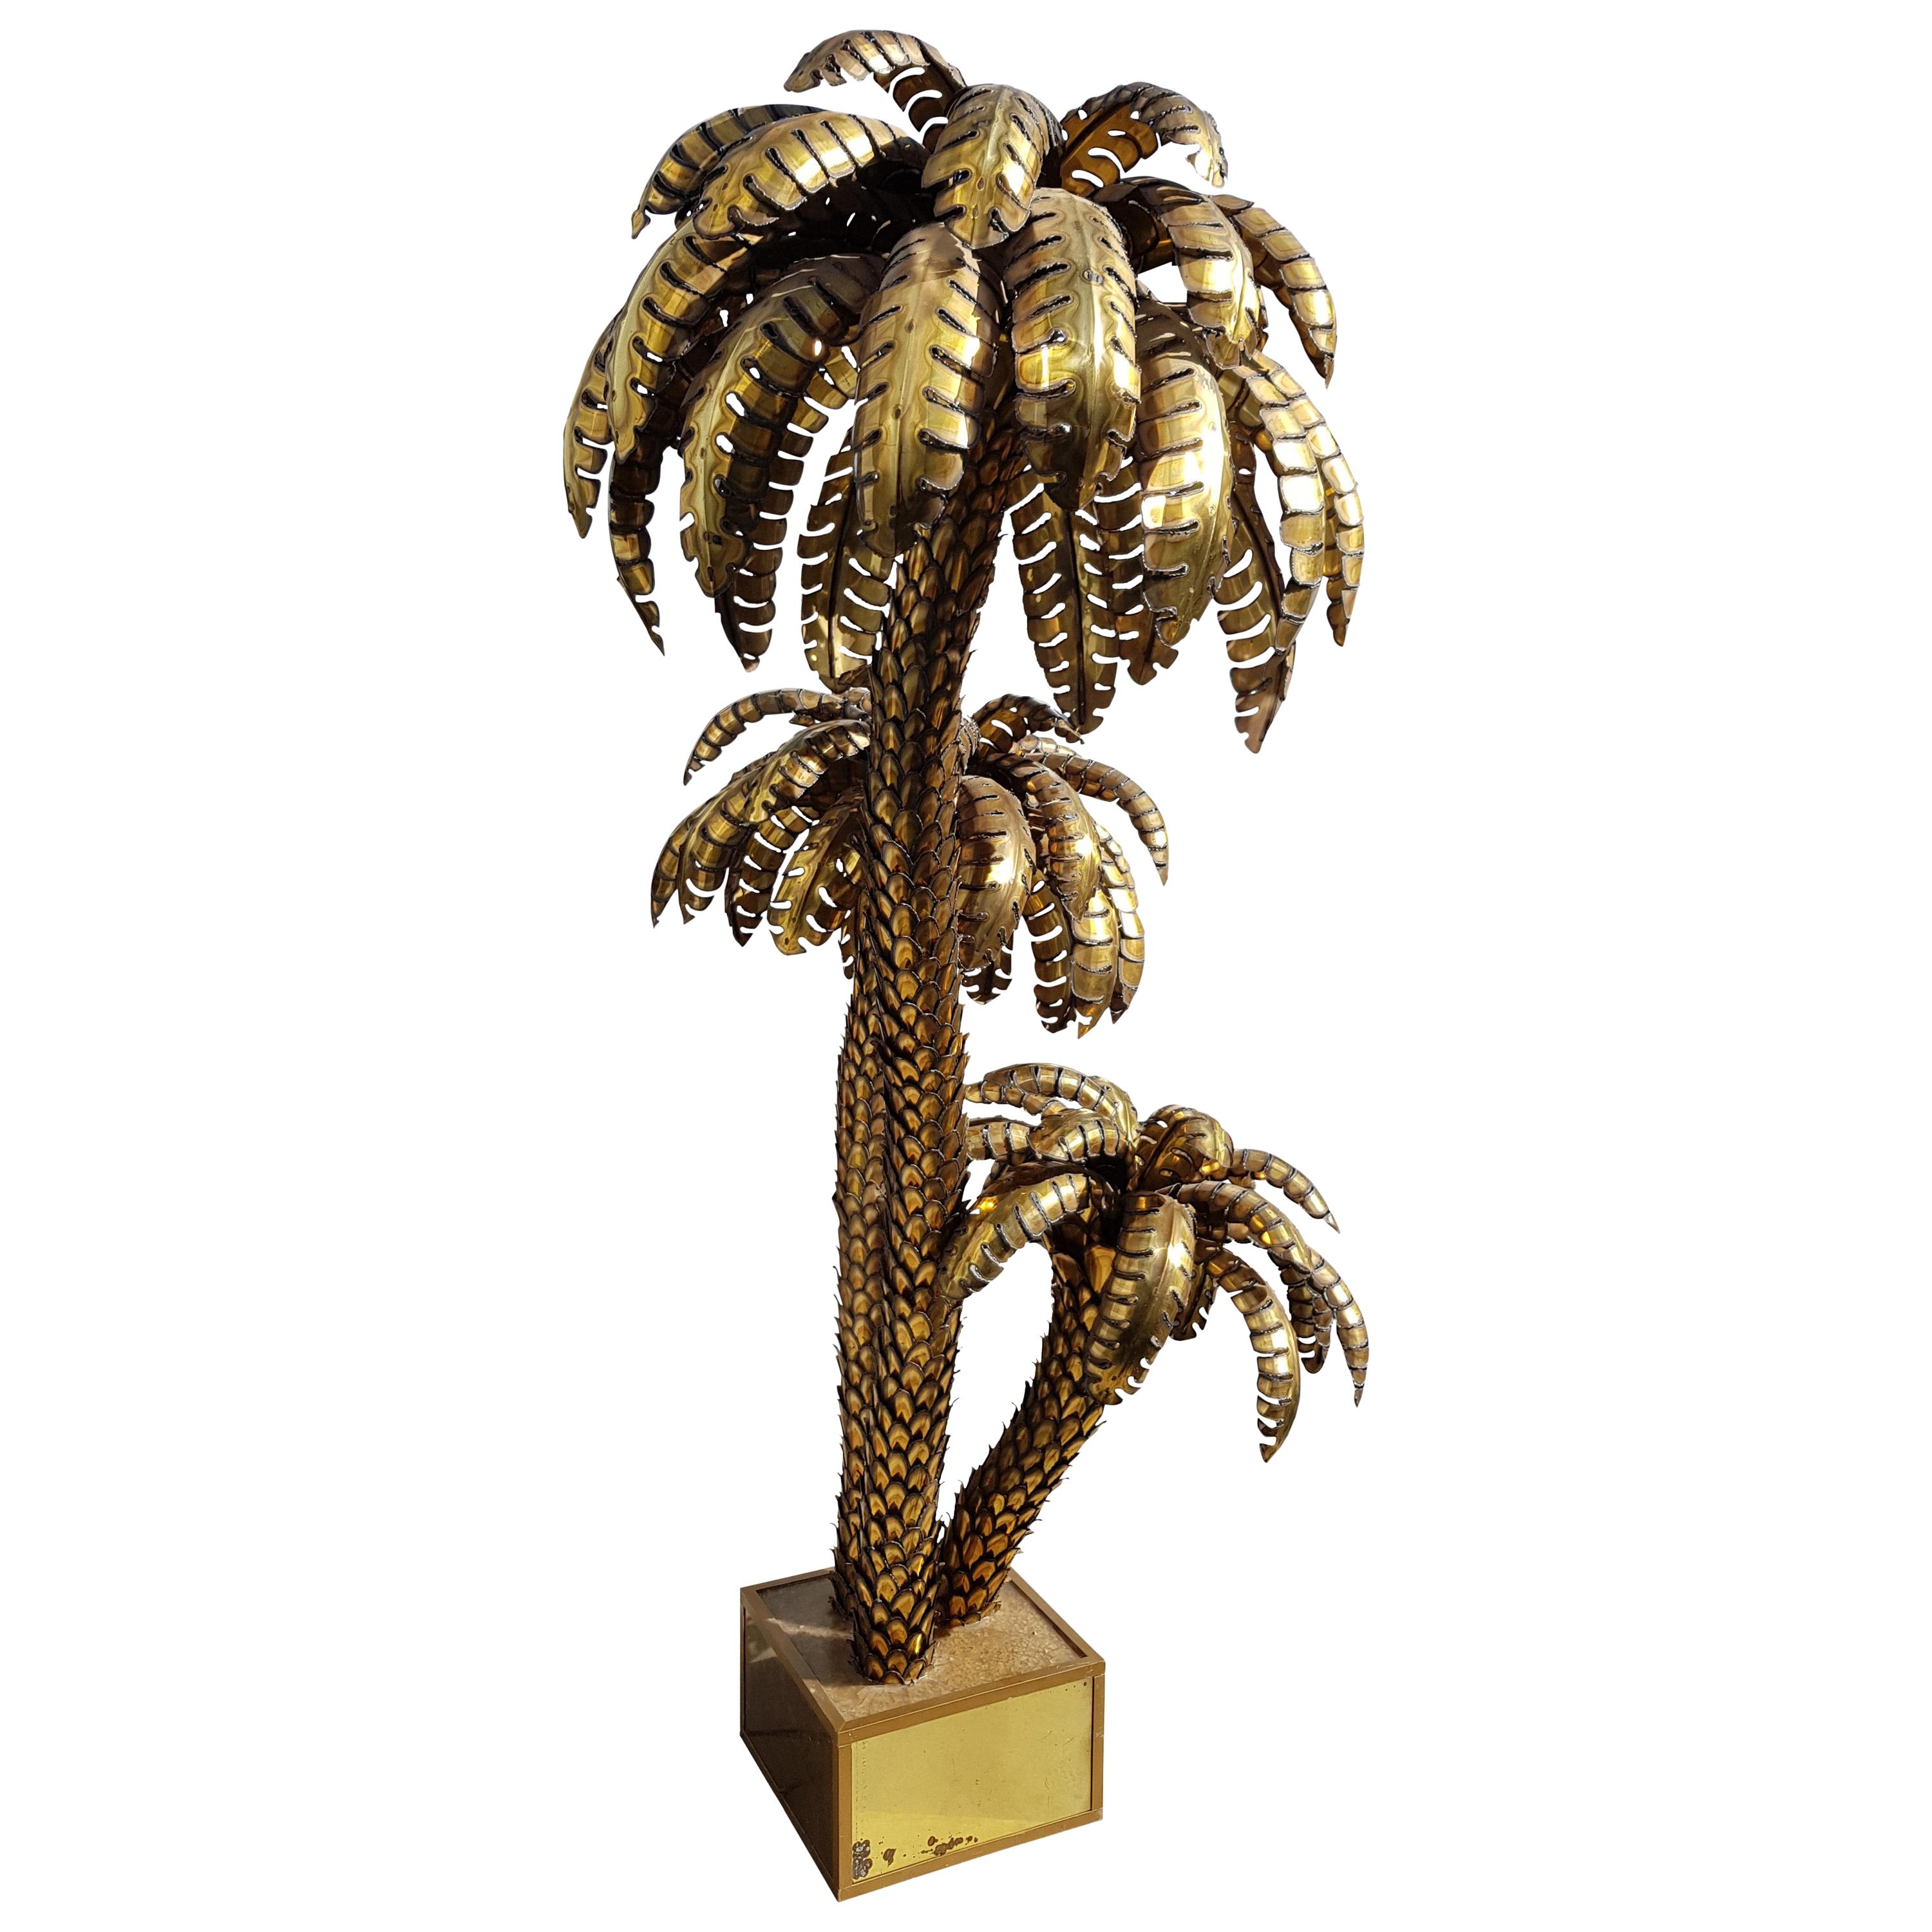 Maison Jansen extra large brass palm tree floor lamp, made in France in the 1970s.
This is an original and unique piece. The palm light has three palm trunks with each a light fitting on the top and three on the underside of the leaves.